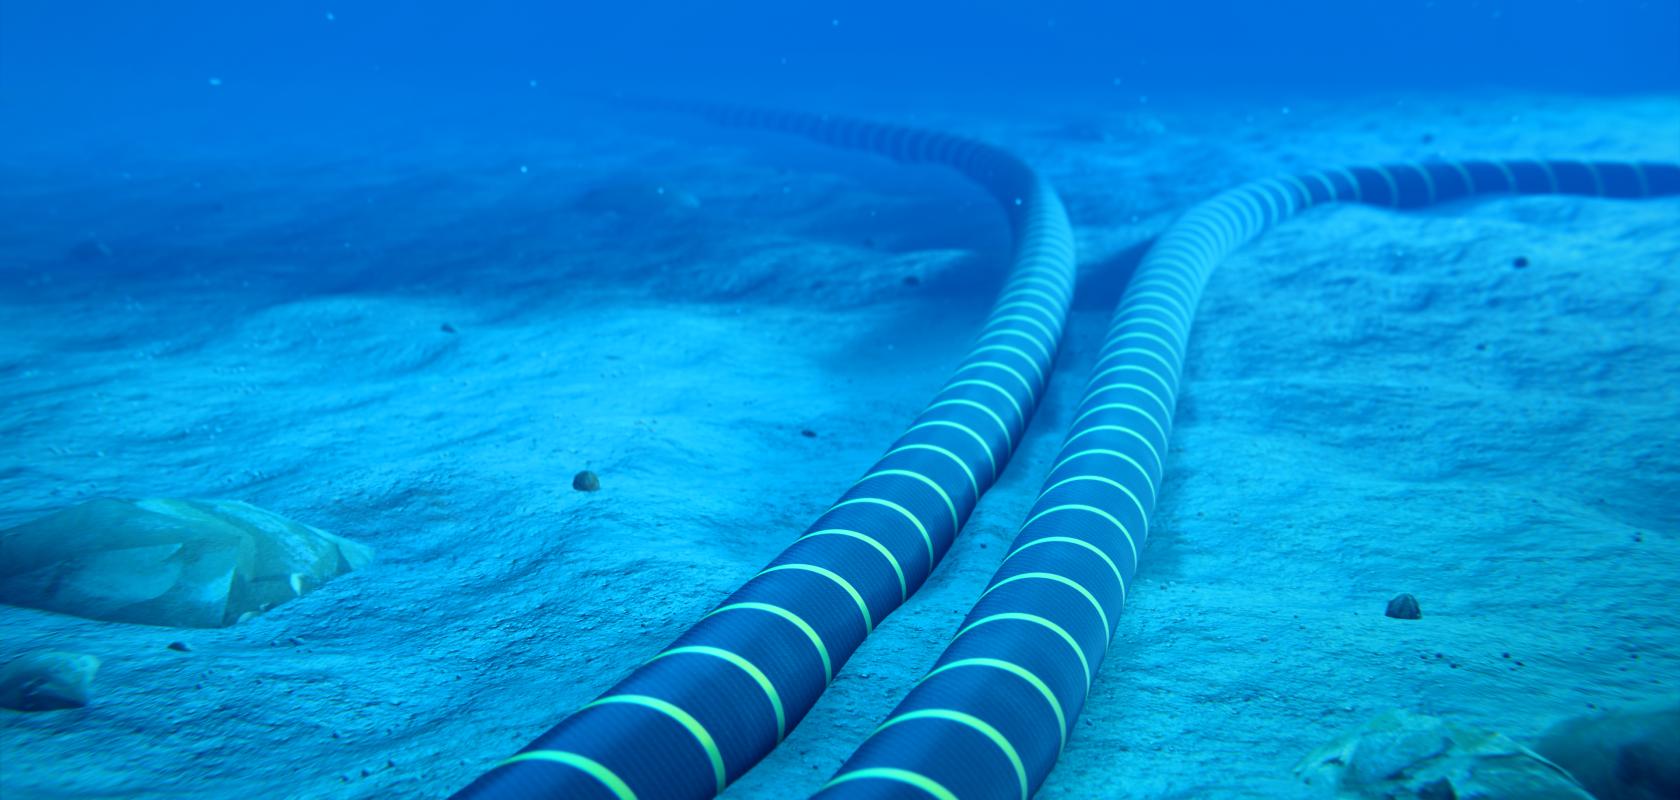 scientists from NPL and the MSL will “convert” a seafloor cable into an array of sensors for earthquakes and ocean currents